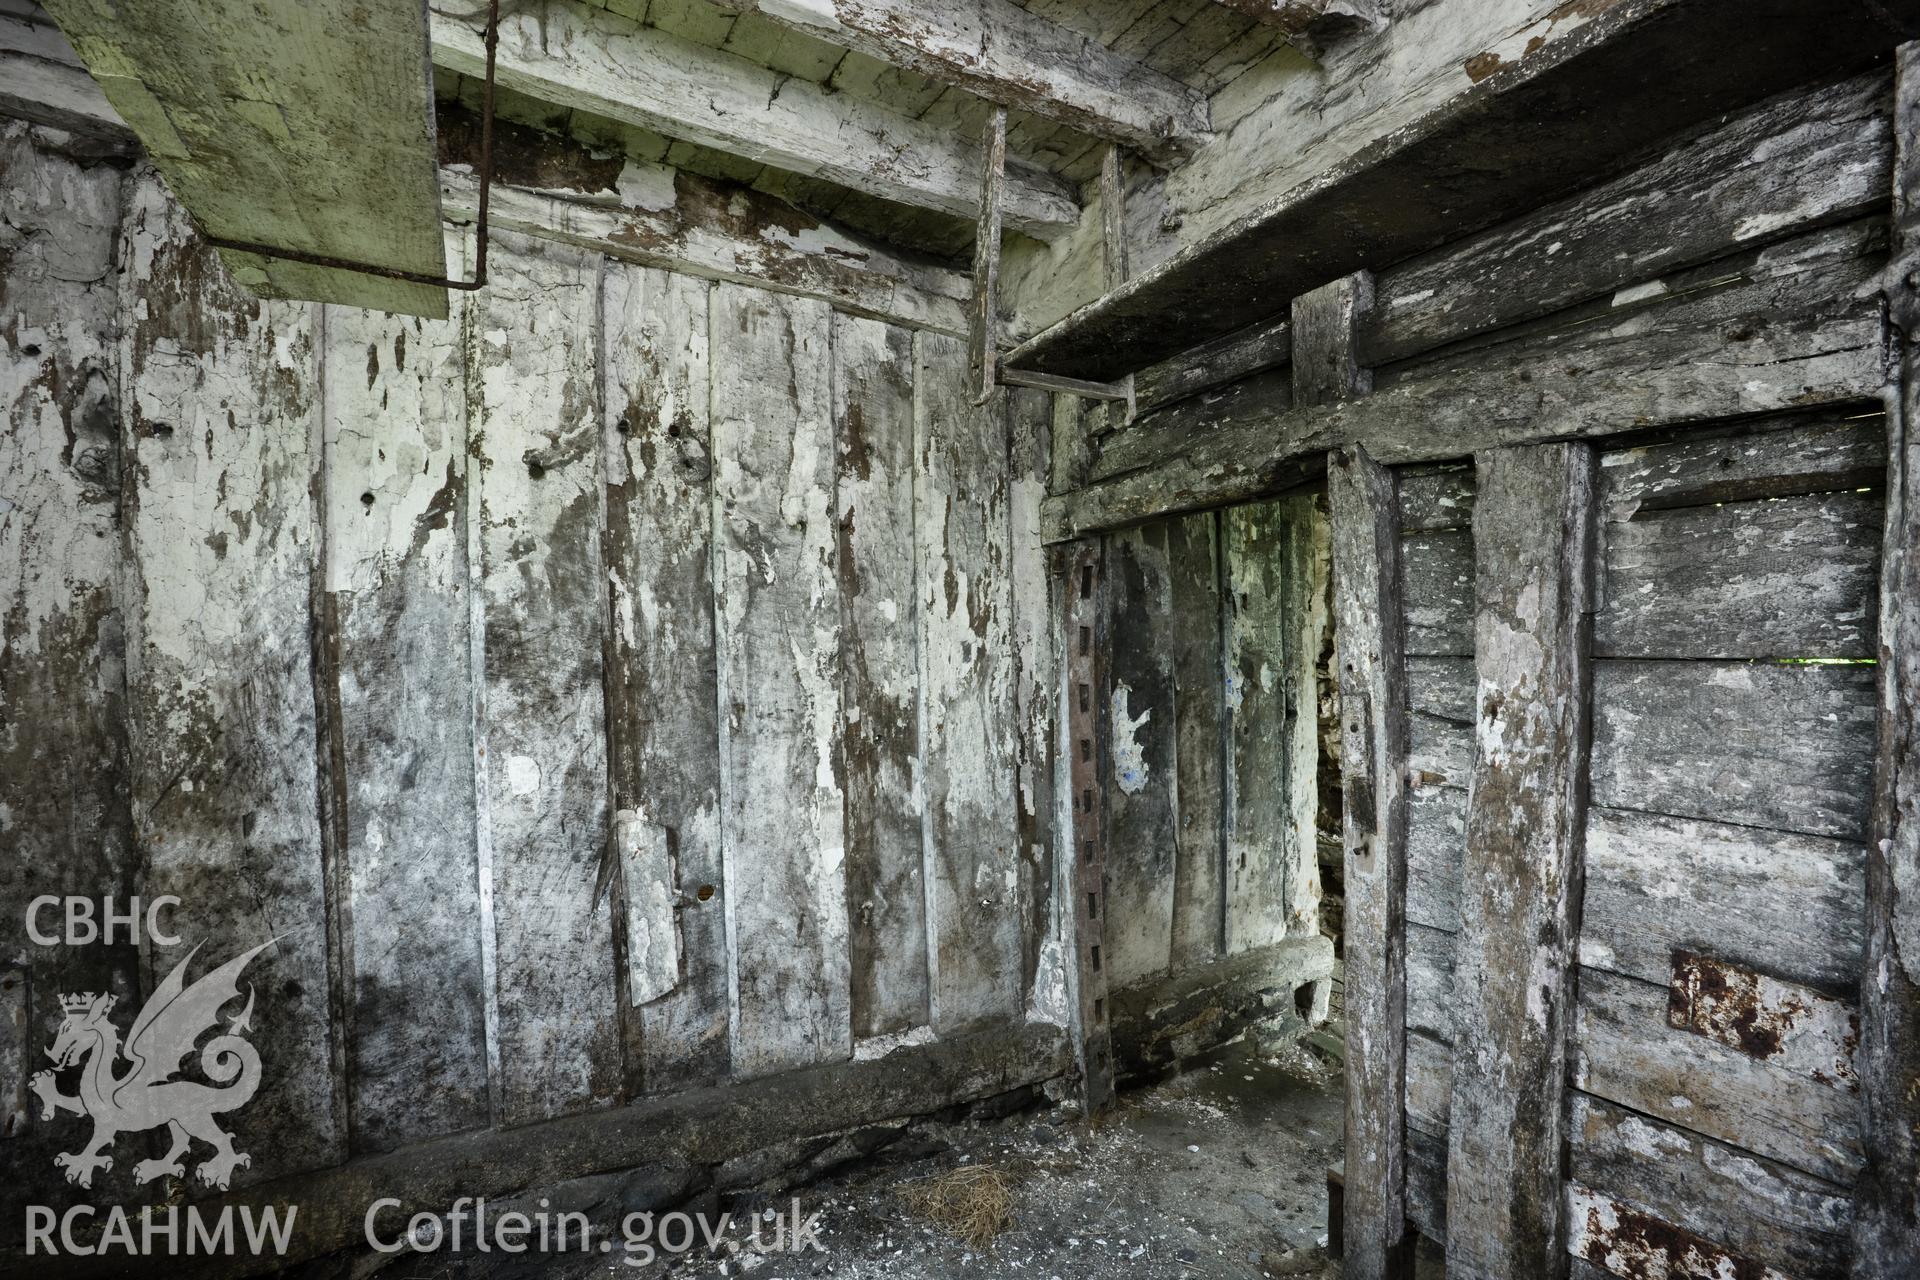 Interior, pantry/dairy, showing changed doorway and mortice joints for ventilation/security rails.